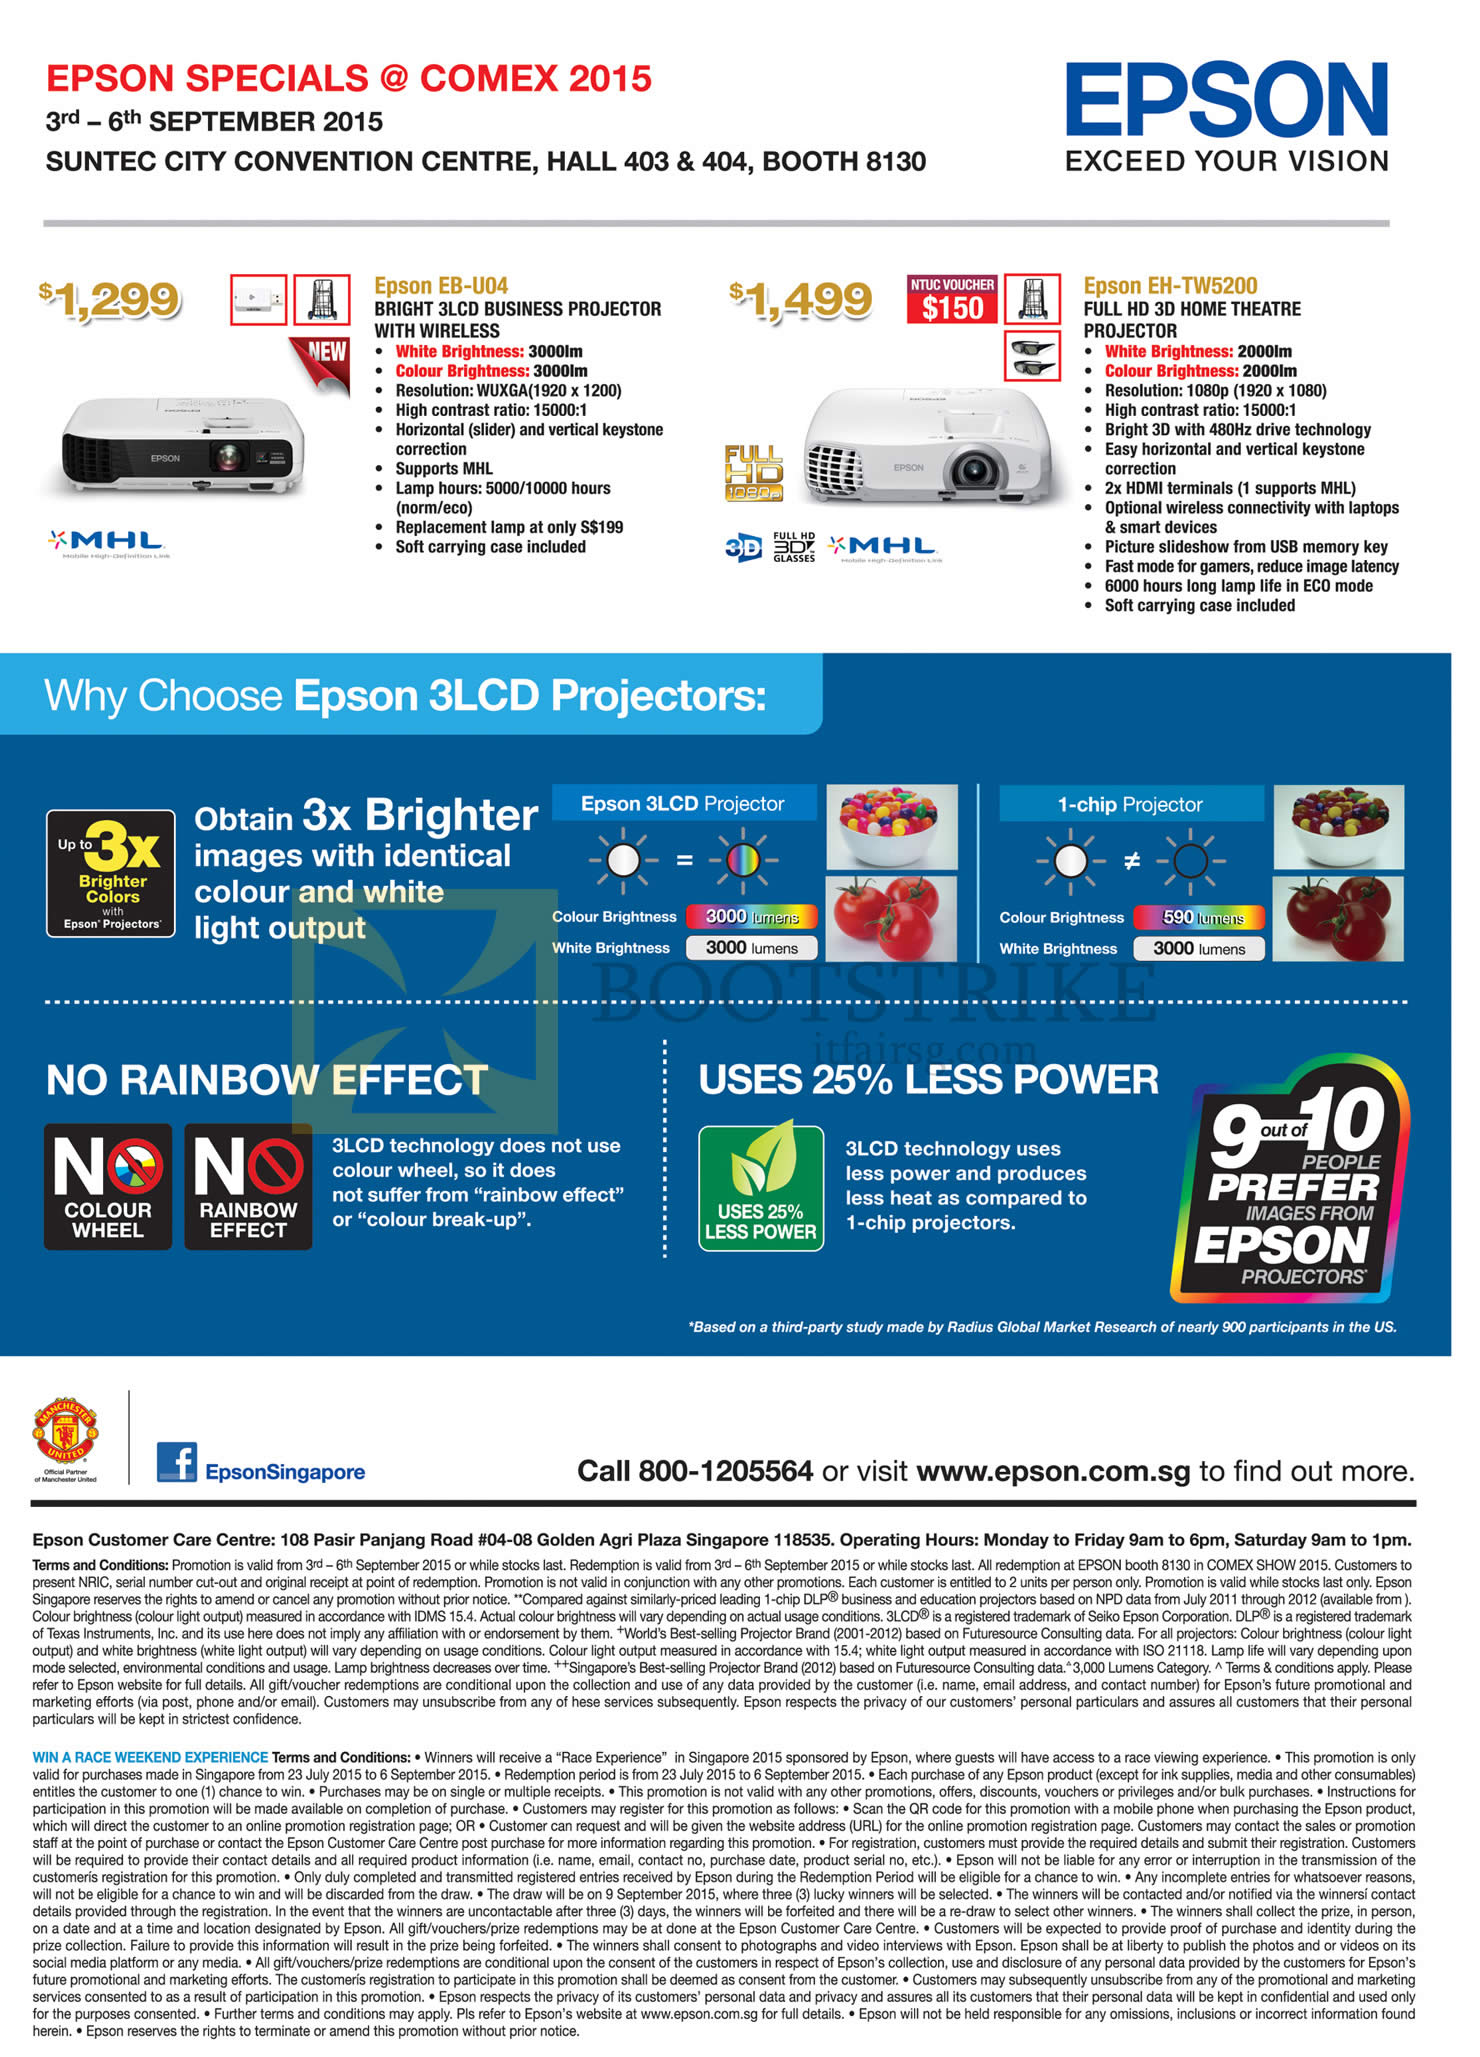 COMEX 2015 price list image brochure of Epson Projectors EB-U04, EH-TW5200, 3LCD Projector Features